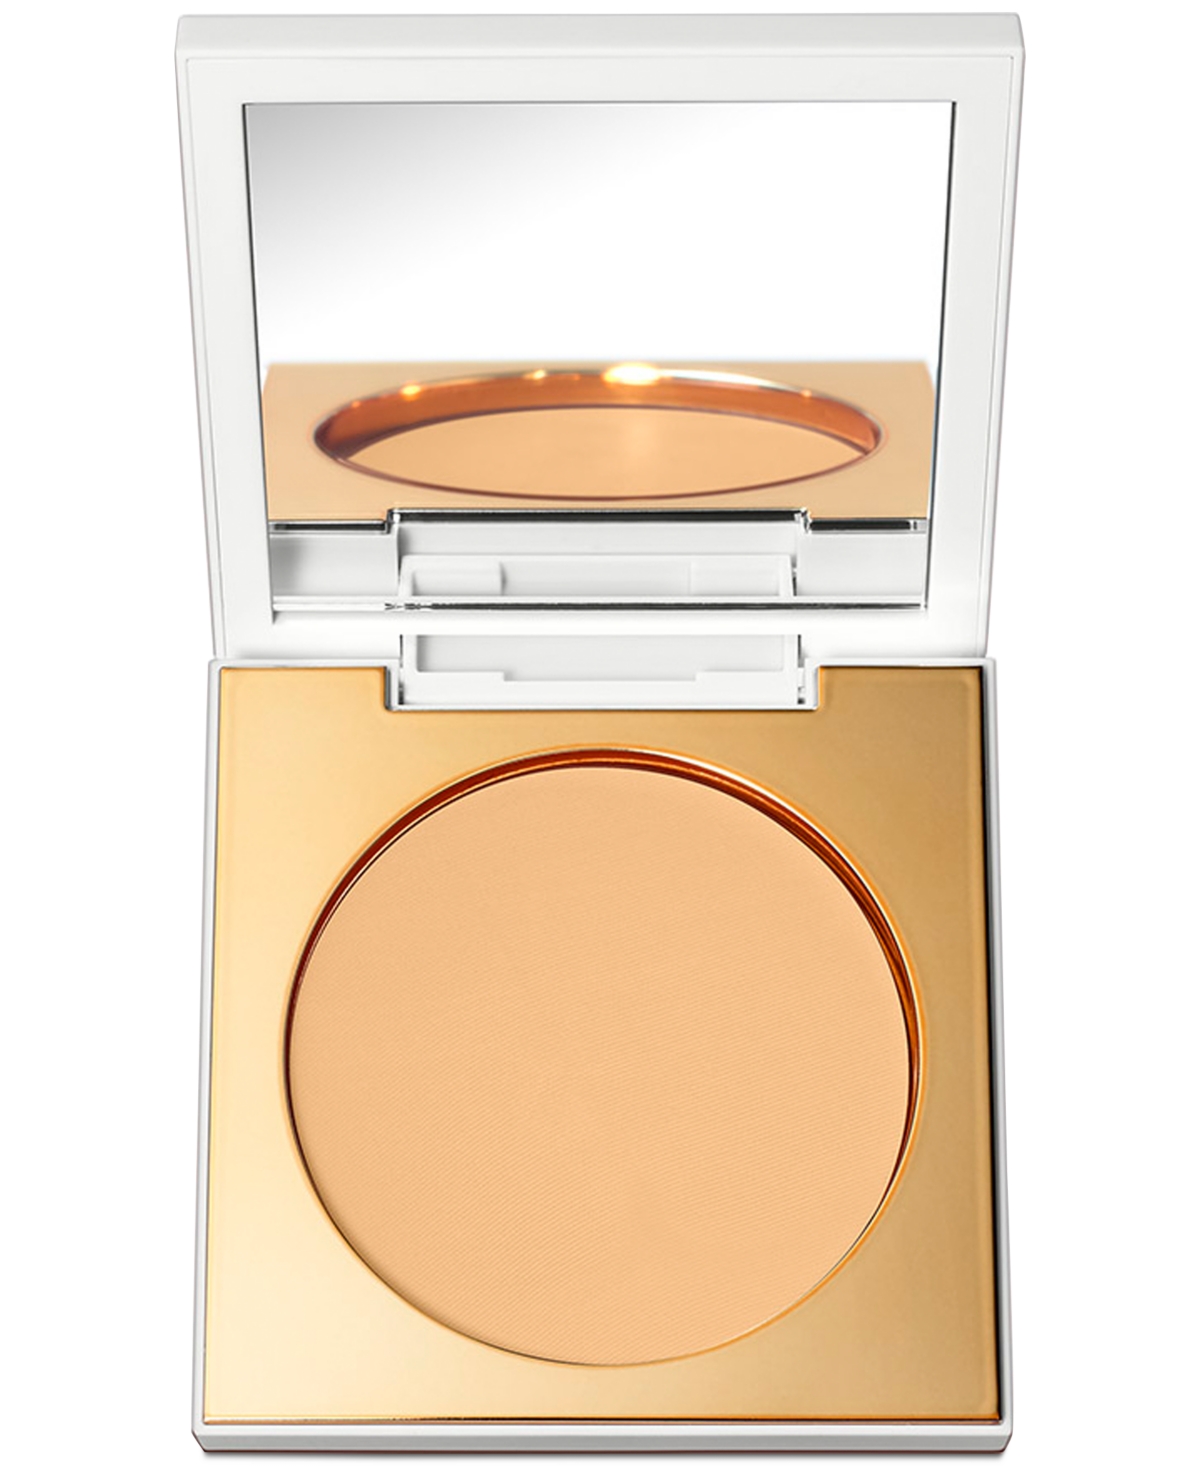 Fashion Fair Iconic Pressed Powder In Golden Luxe